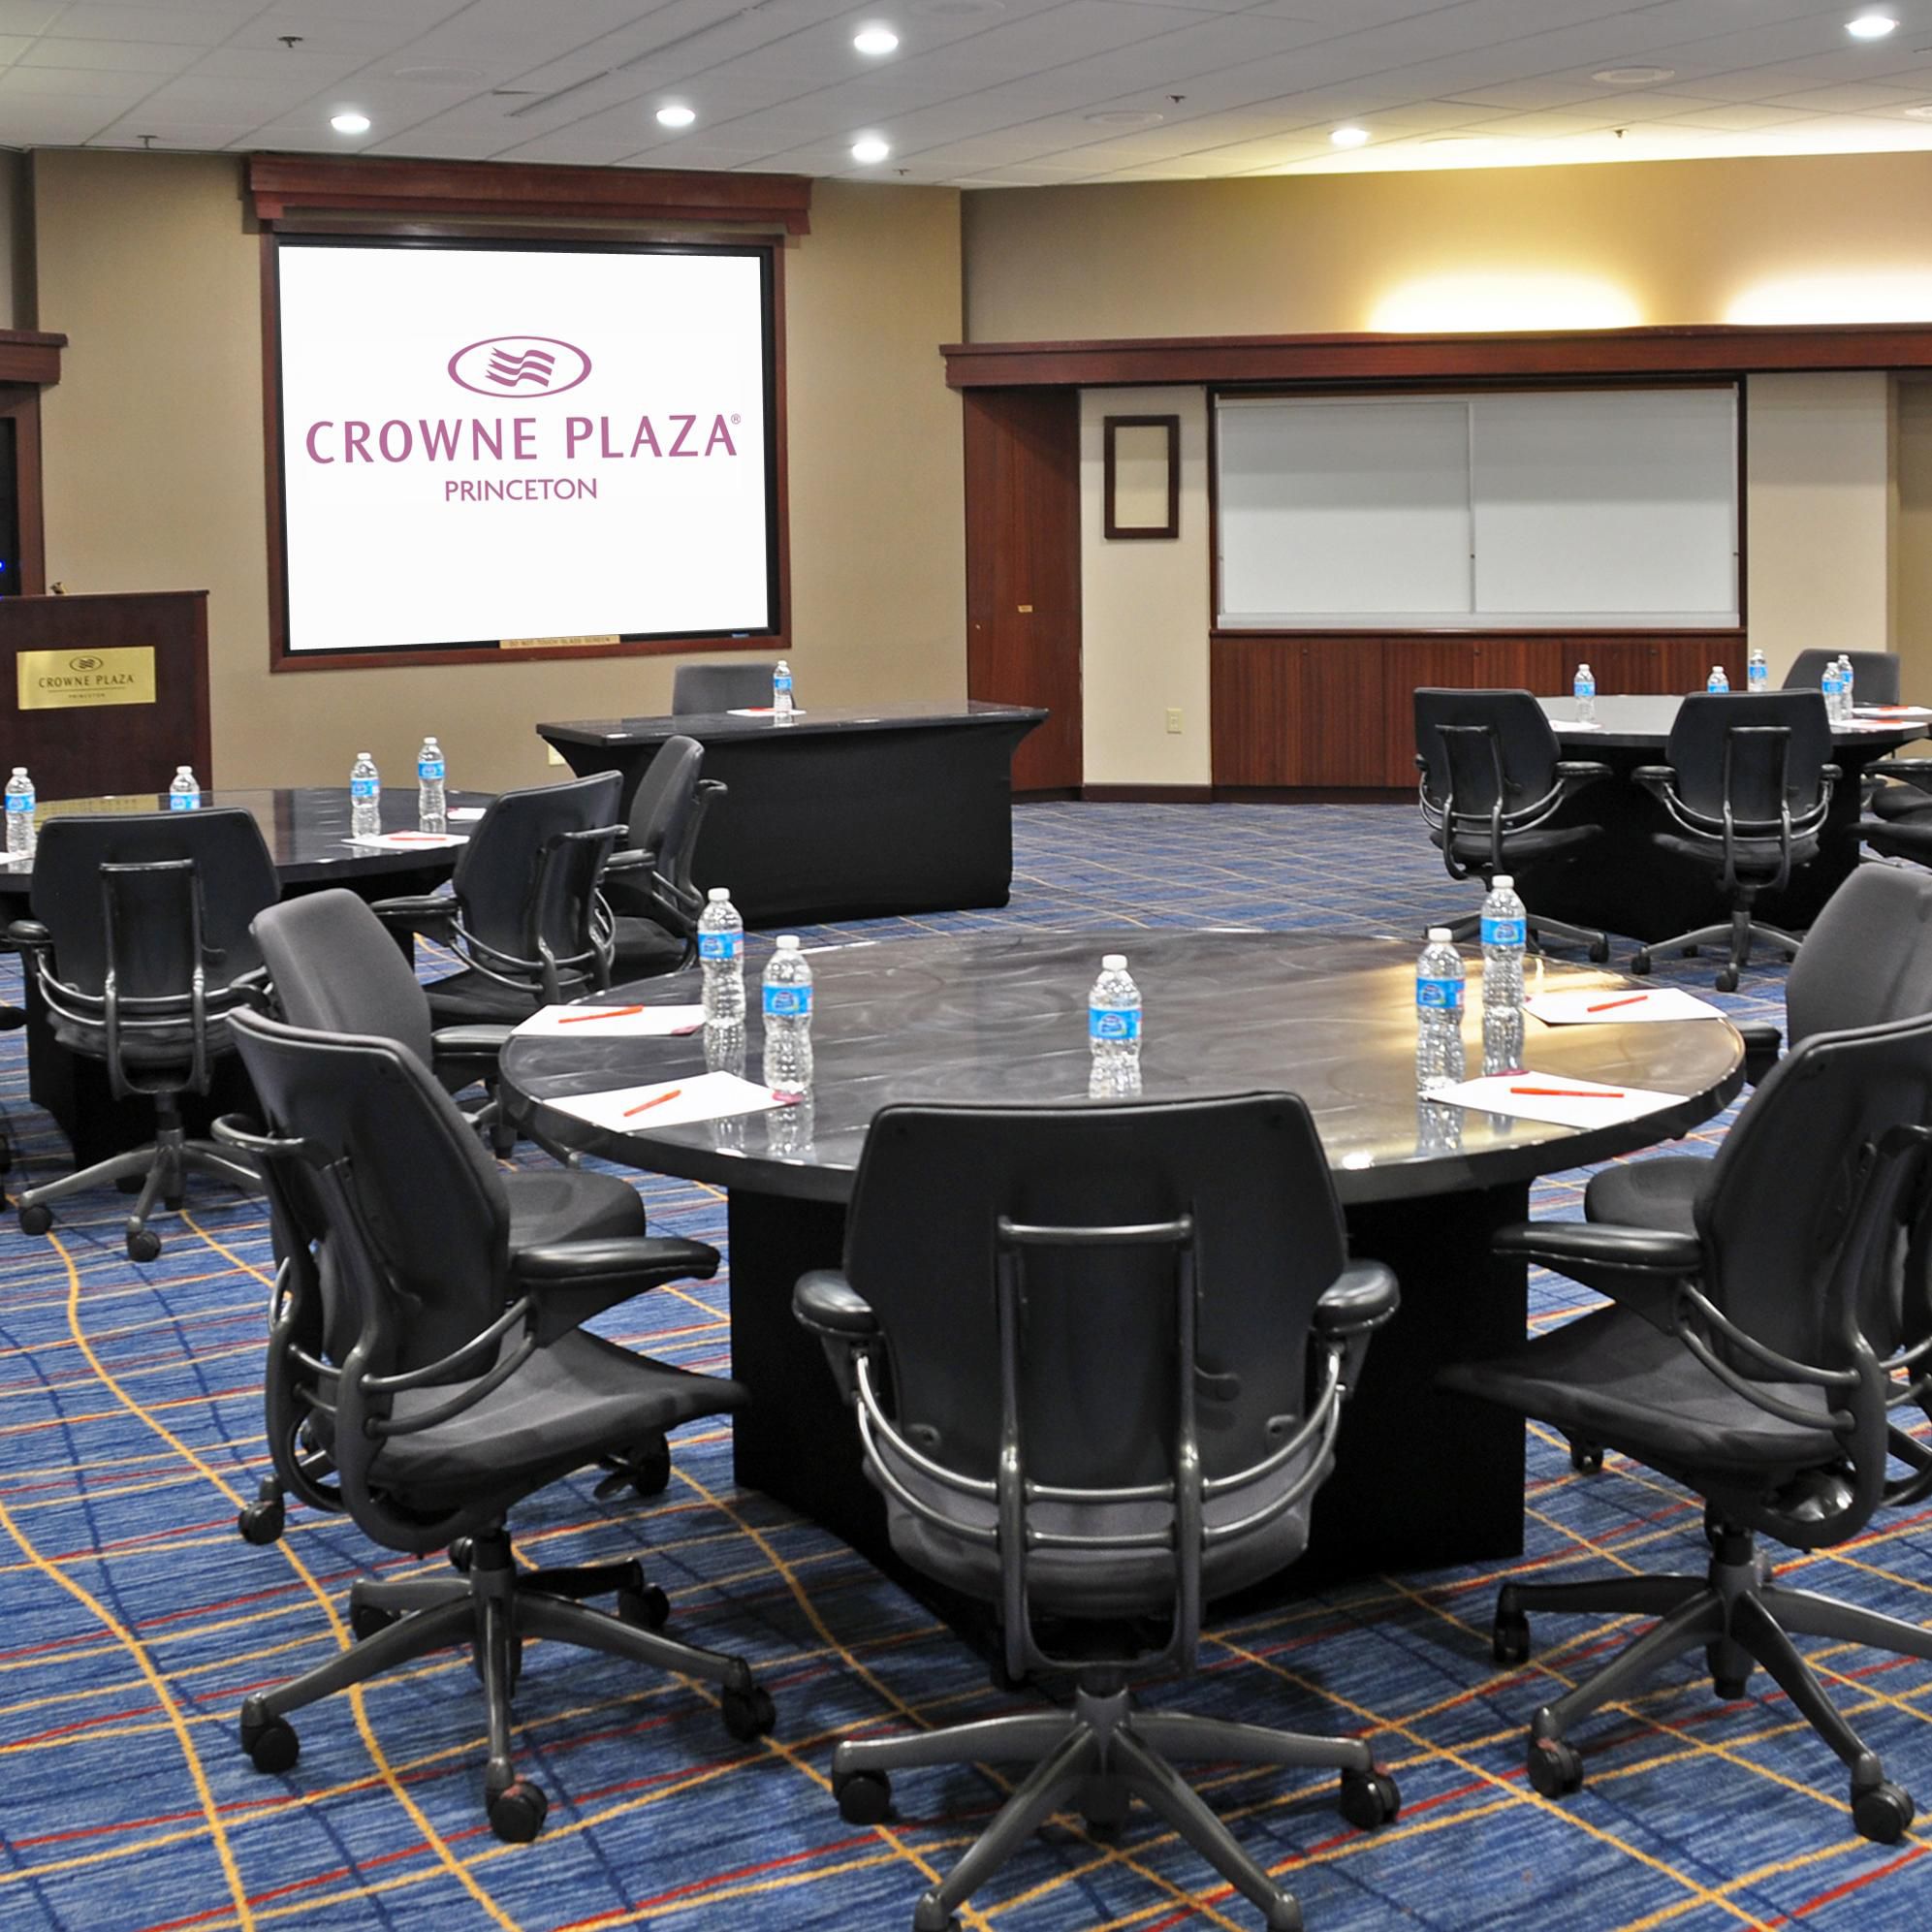 One of 54 total meeting rooms